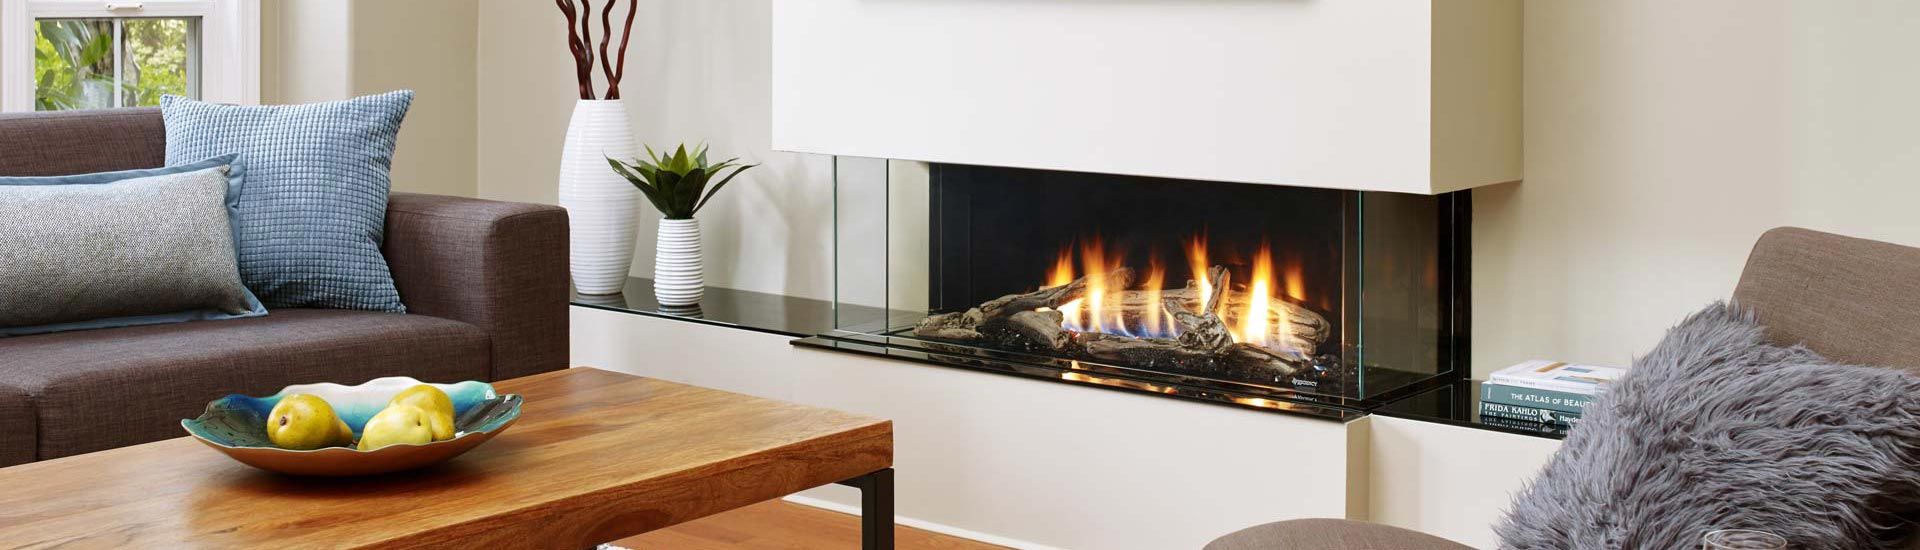 Fireplace Website Awesome Mister Chimney & Nova Fireplaces Helps Us to Convert the